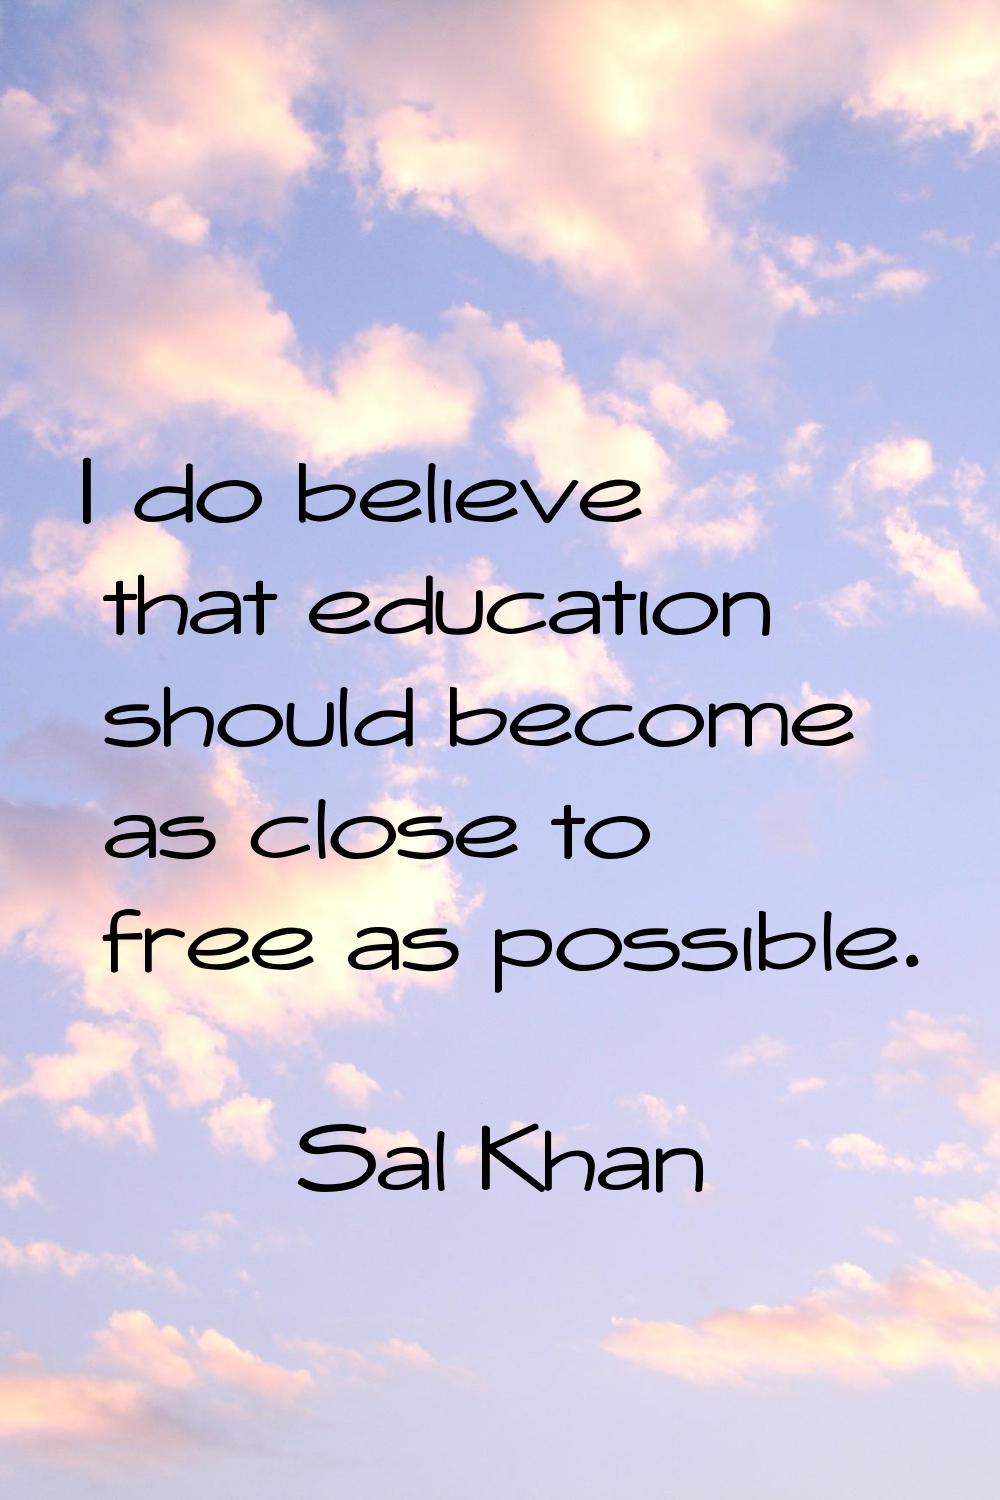 I do believe that education should become as close to free as possible.